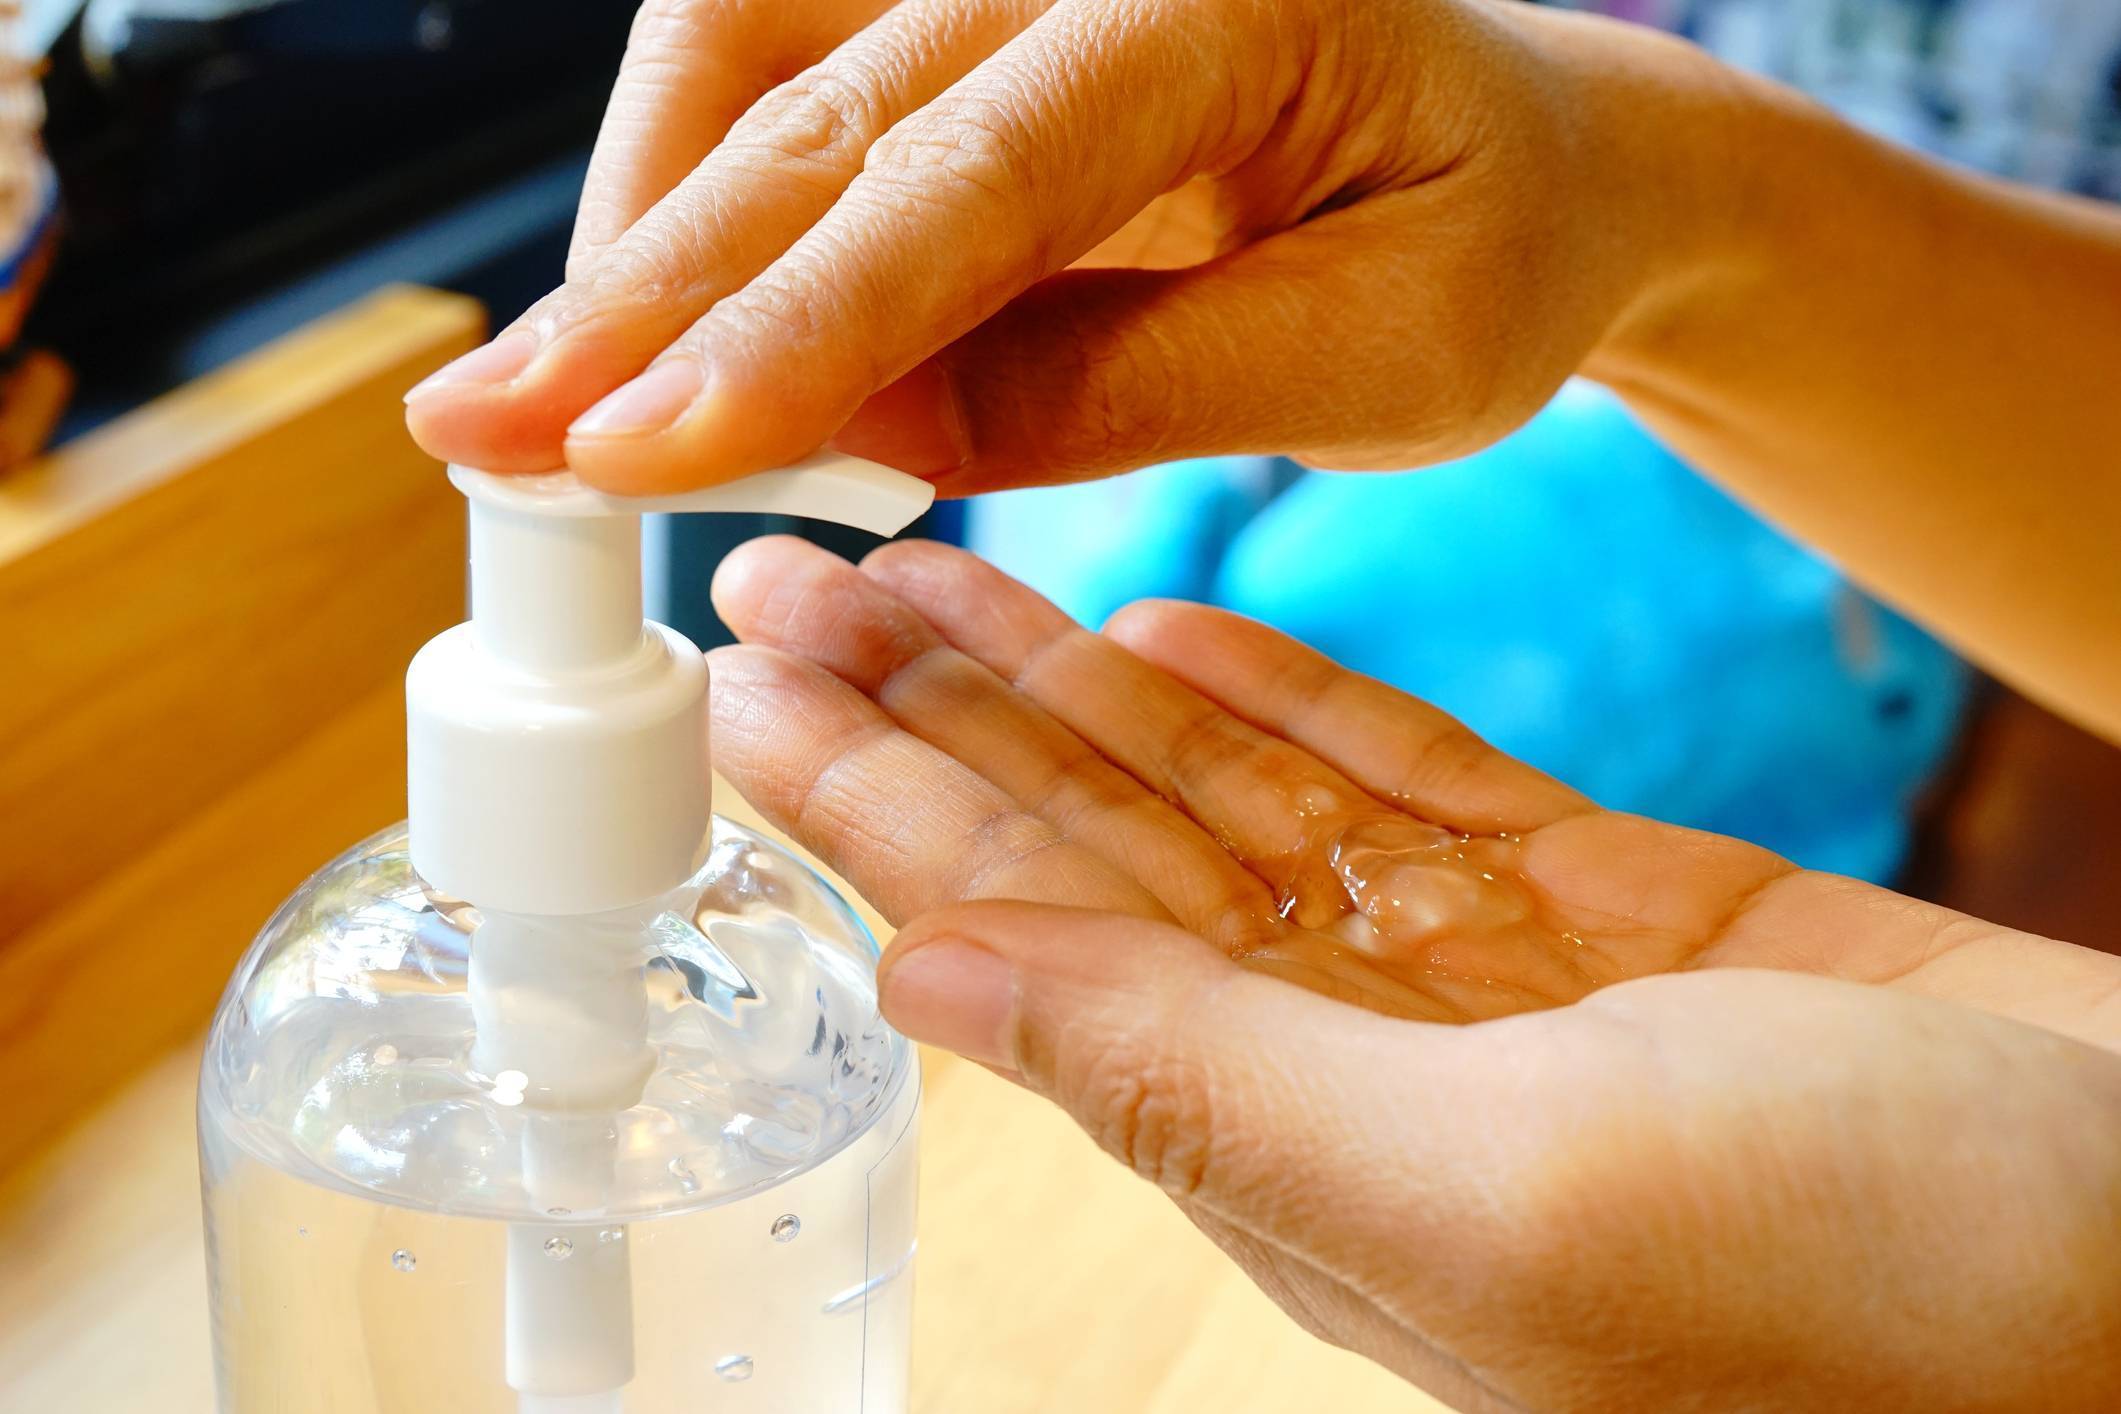 applying hand sanitizer from a pump bottle onto hands